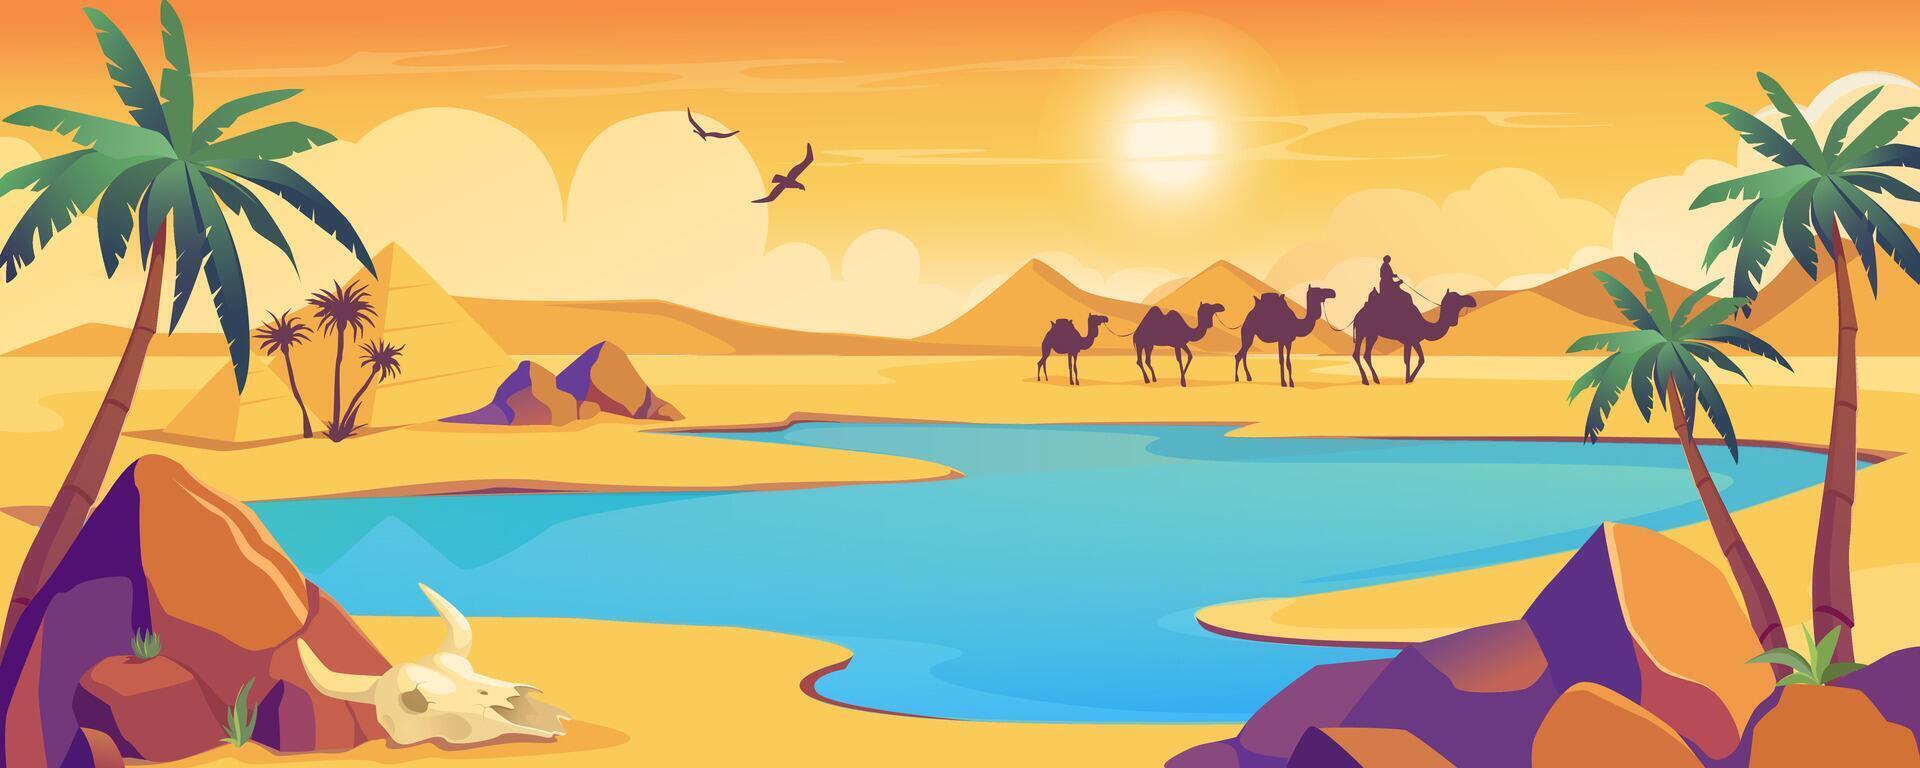 Oasis view in desert background banner in cartoon design. Dark silhouette of camel caravan, dry sand space with dunes and hills, blue water lake with palm trees and stones. cartoon illustration vector